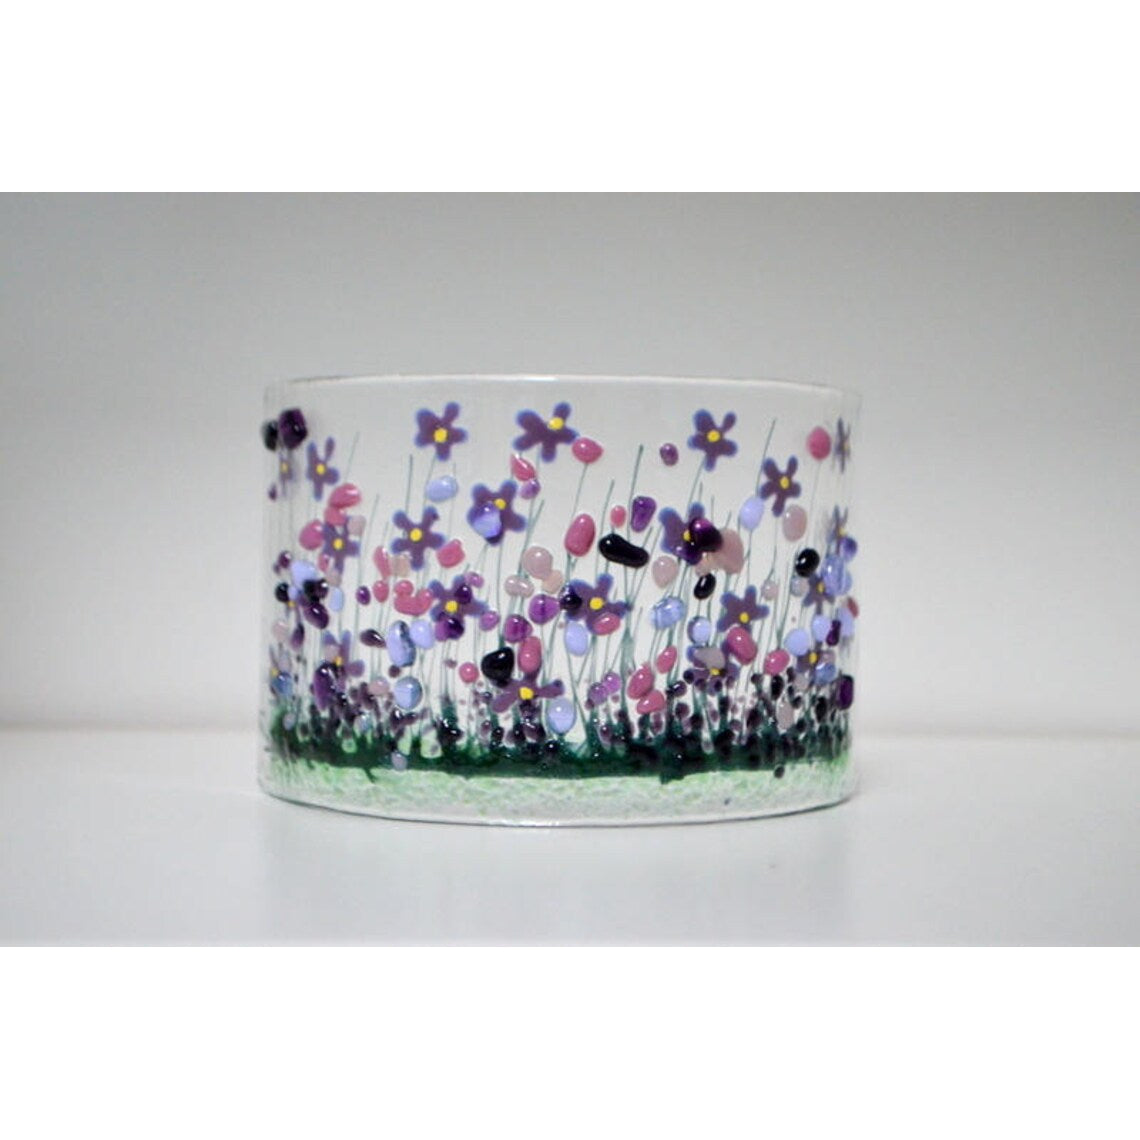 Handmade Fused Glass - Violet Curve by Pam Peters